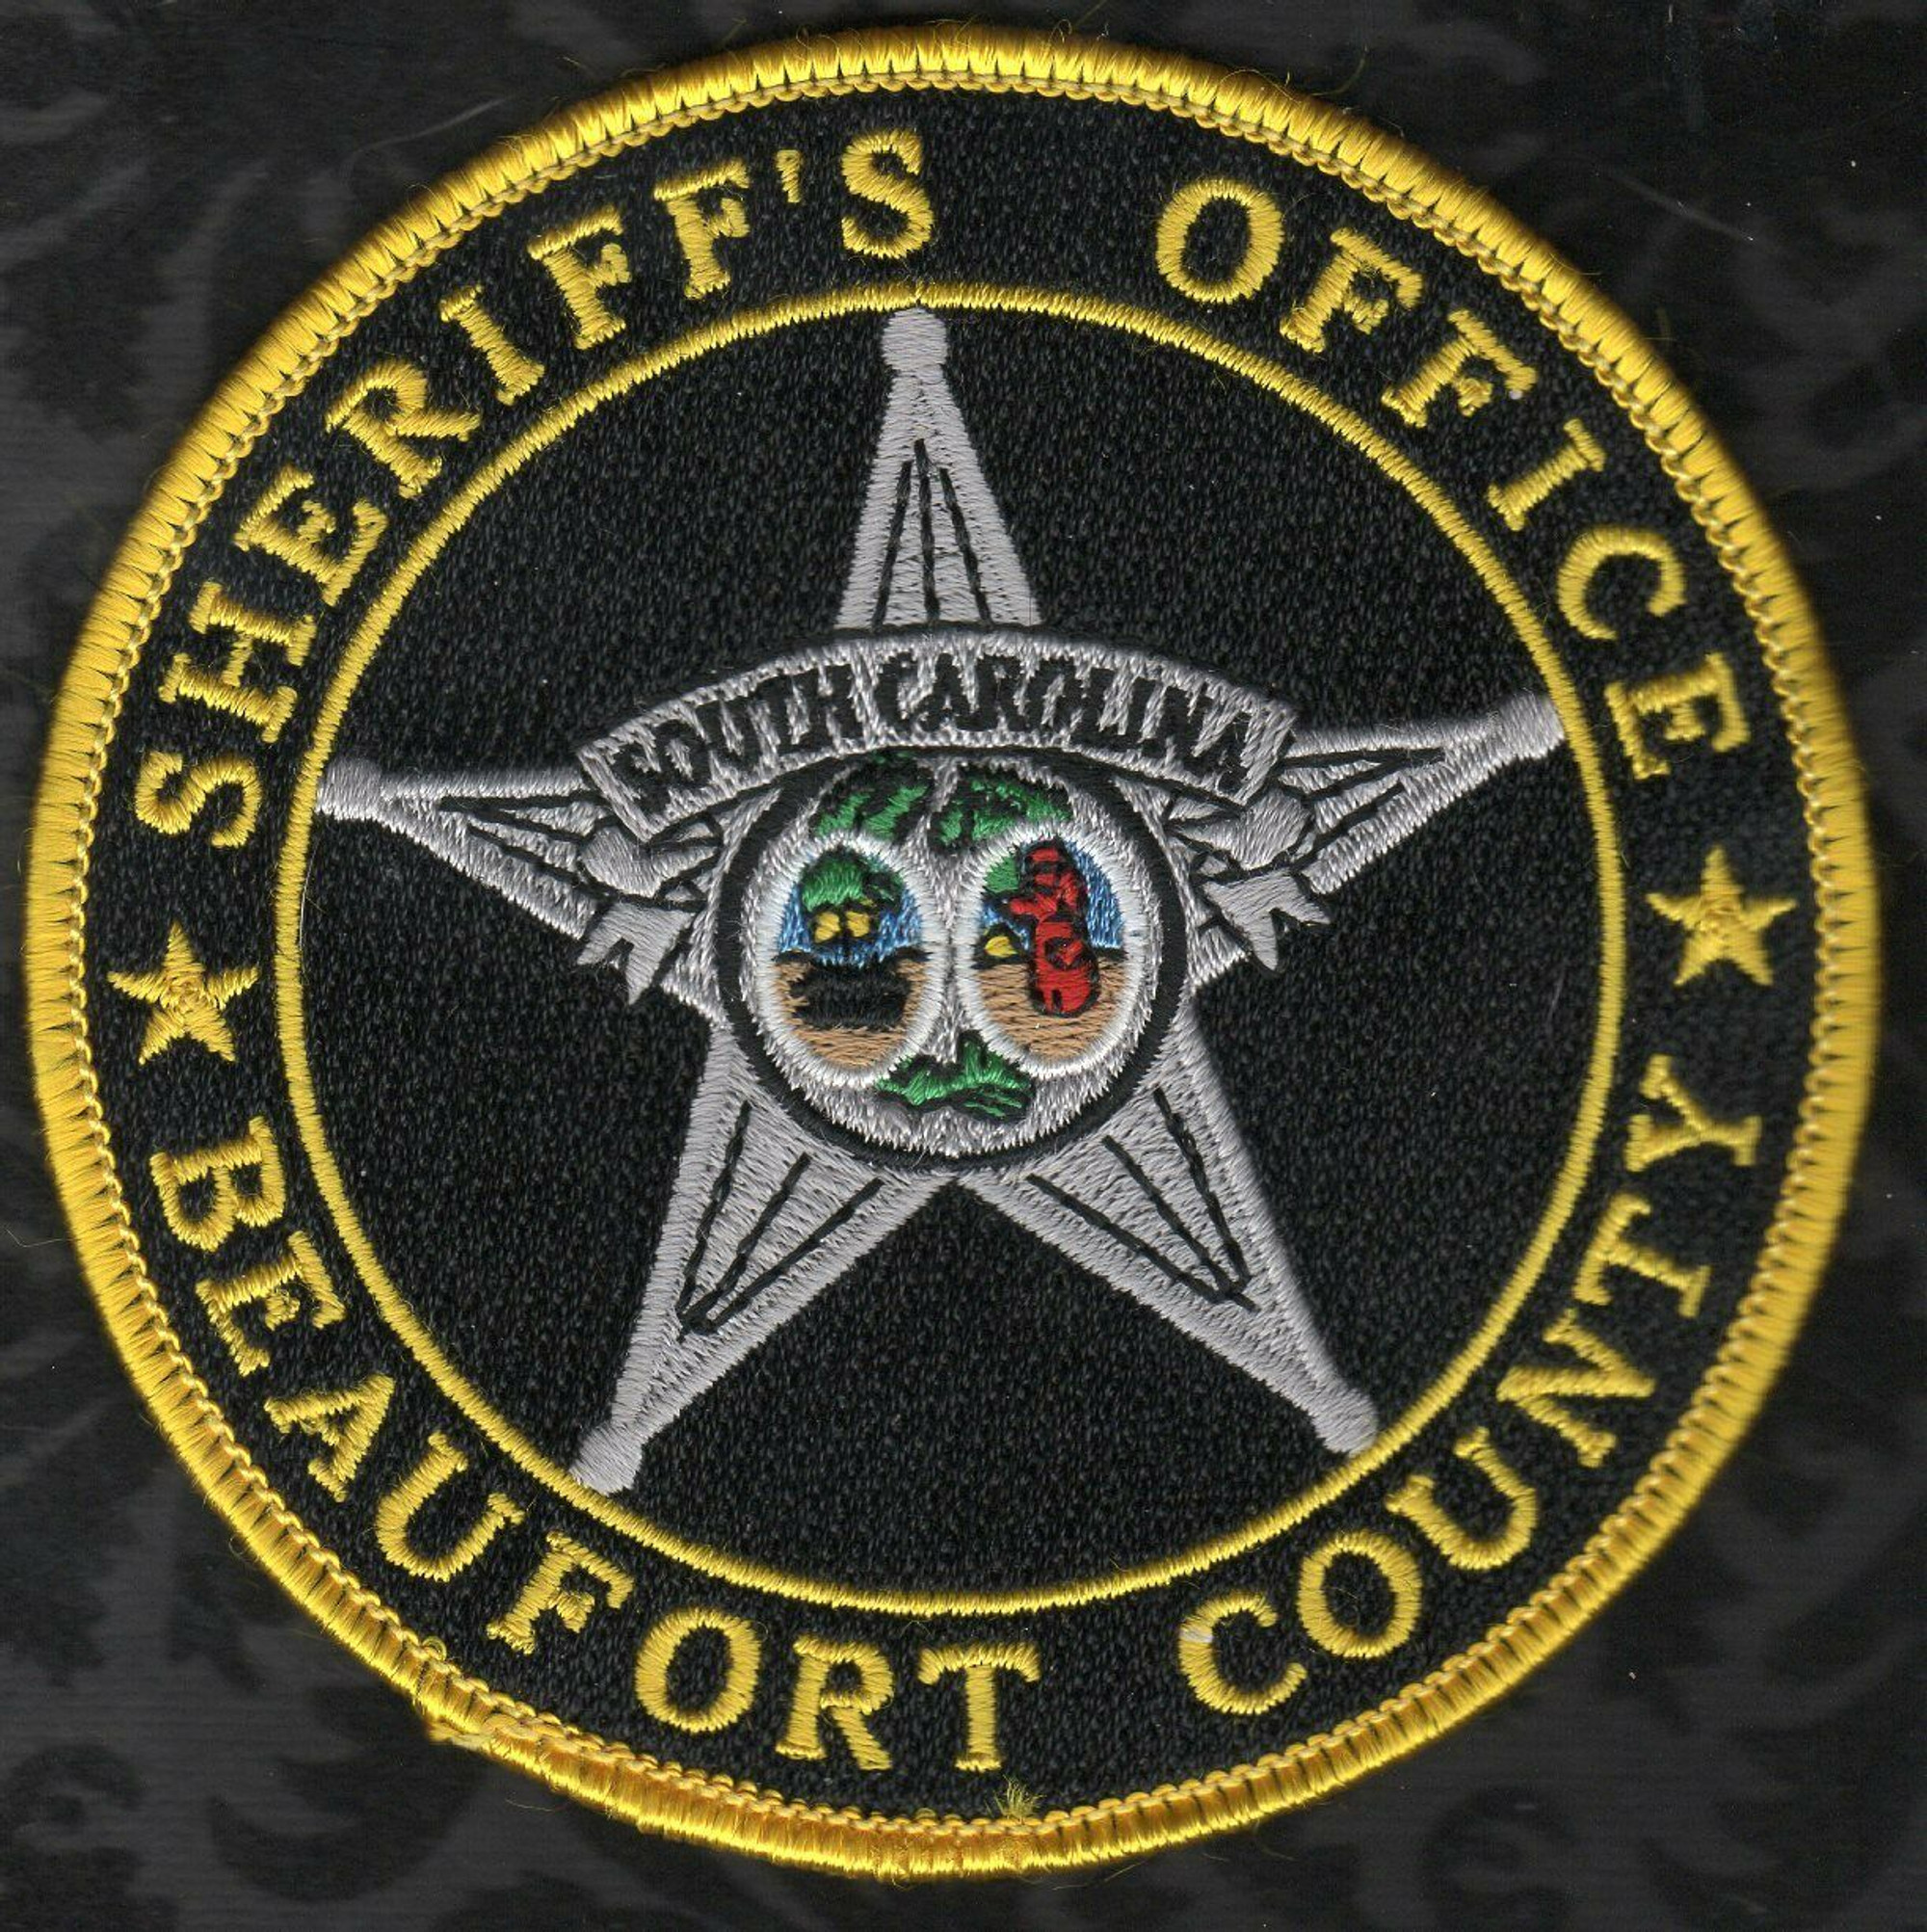 Beaufort County SC Police Patch